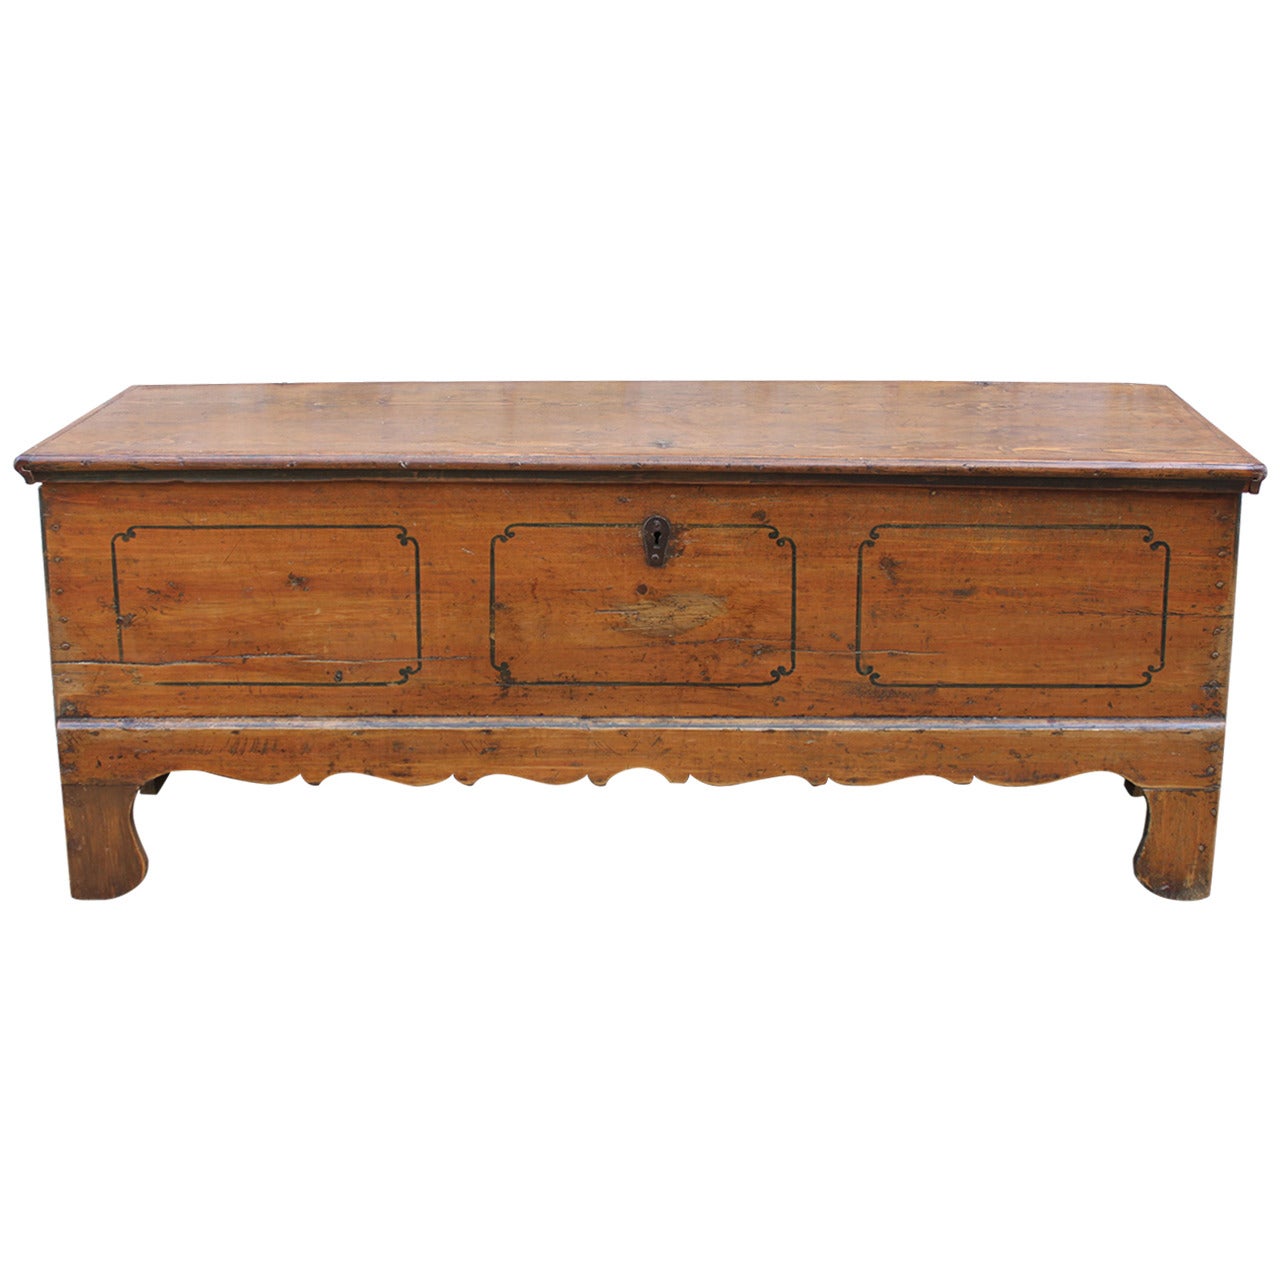 19th Century Rustic Swedish Pine Storage Chest with Original Paint and Apron